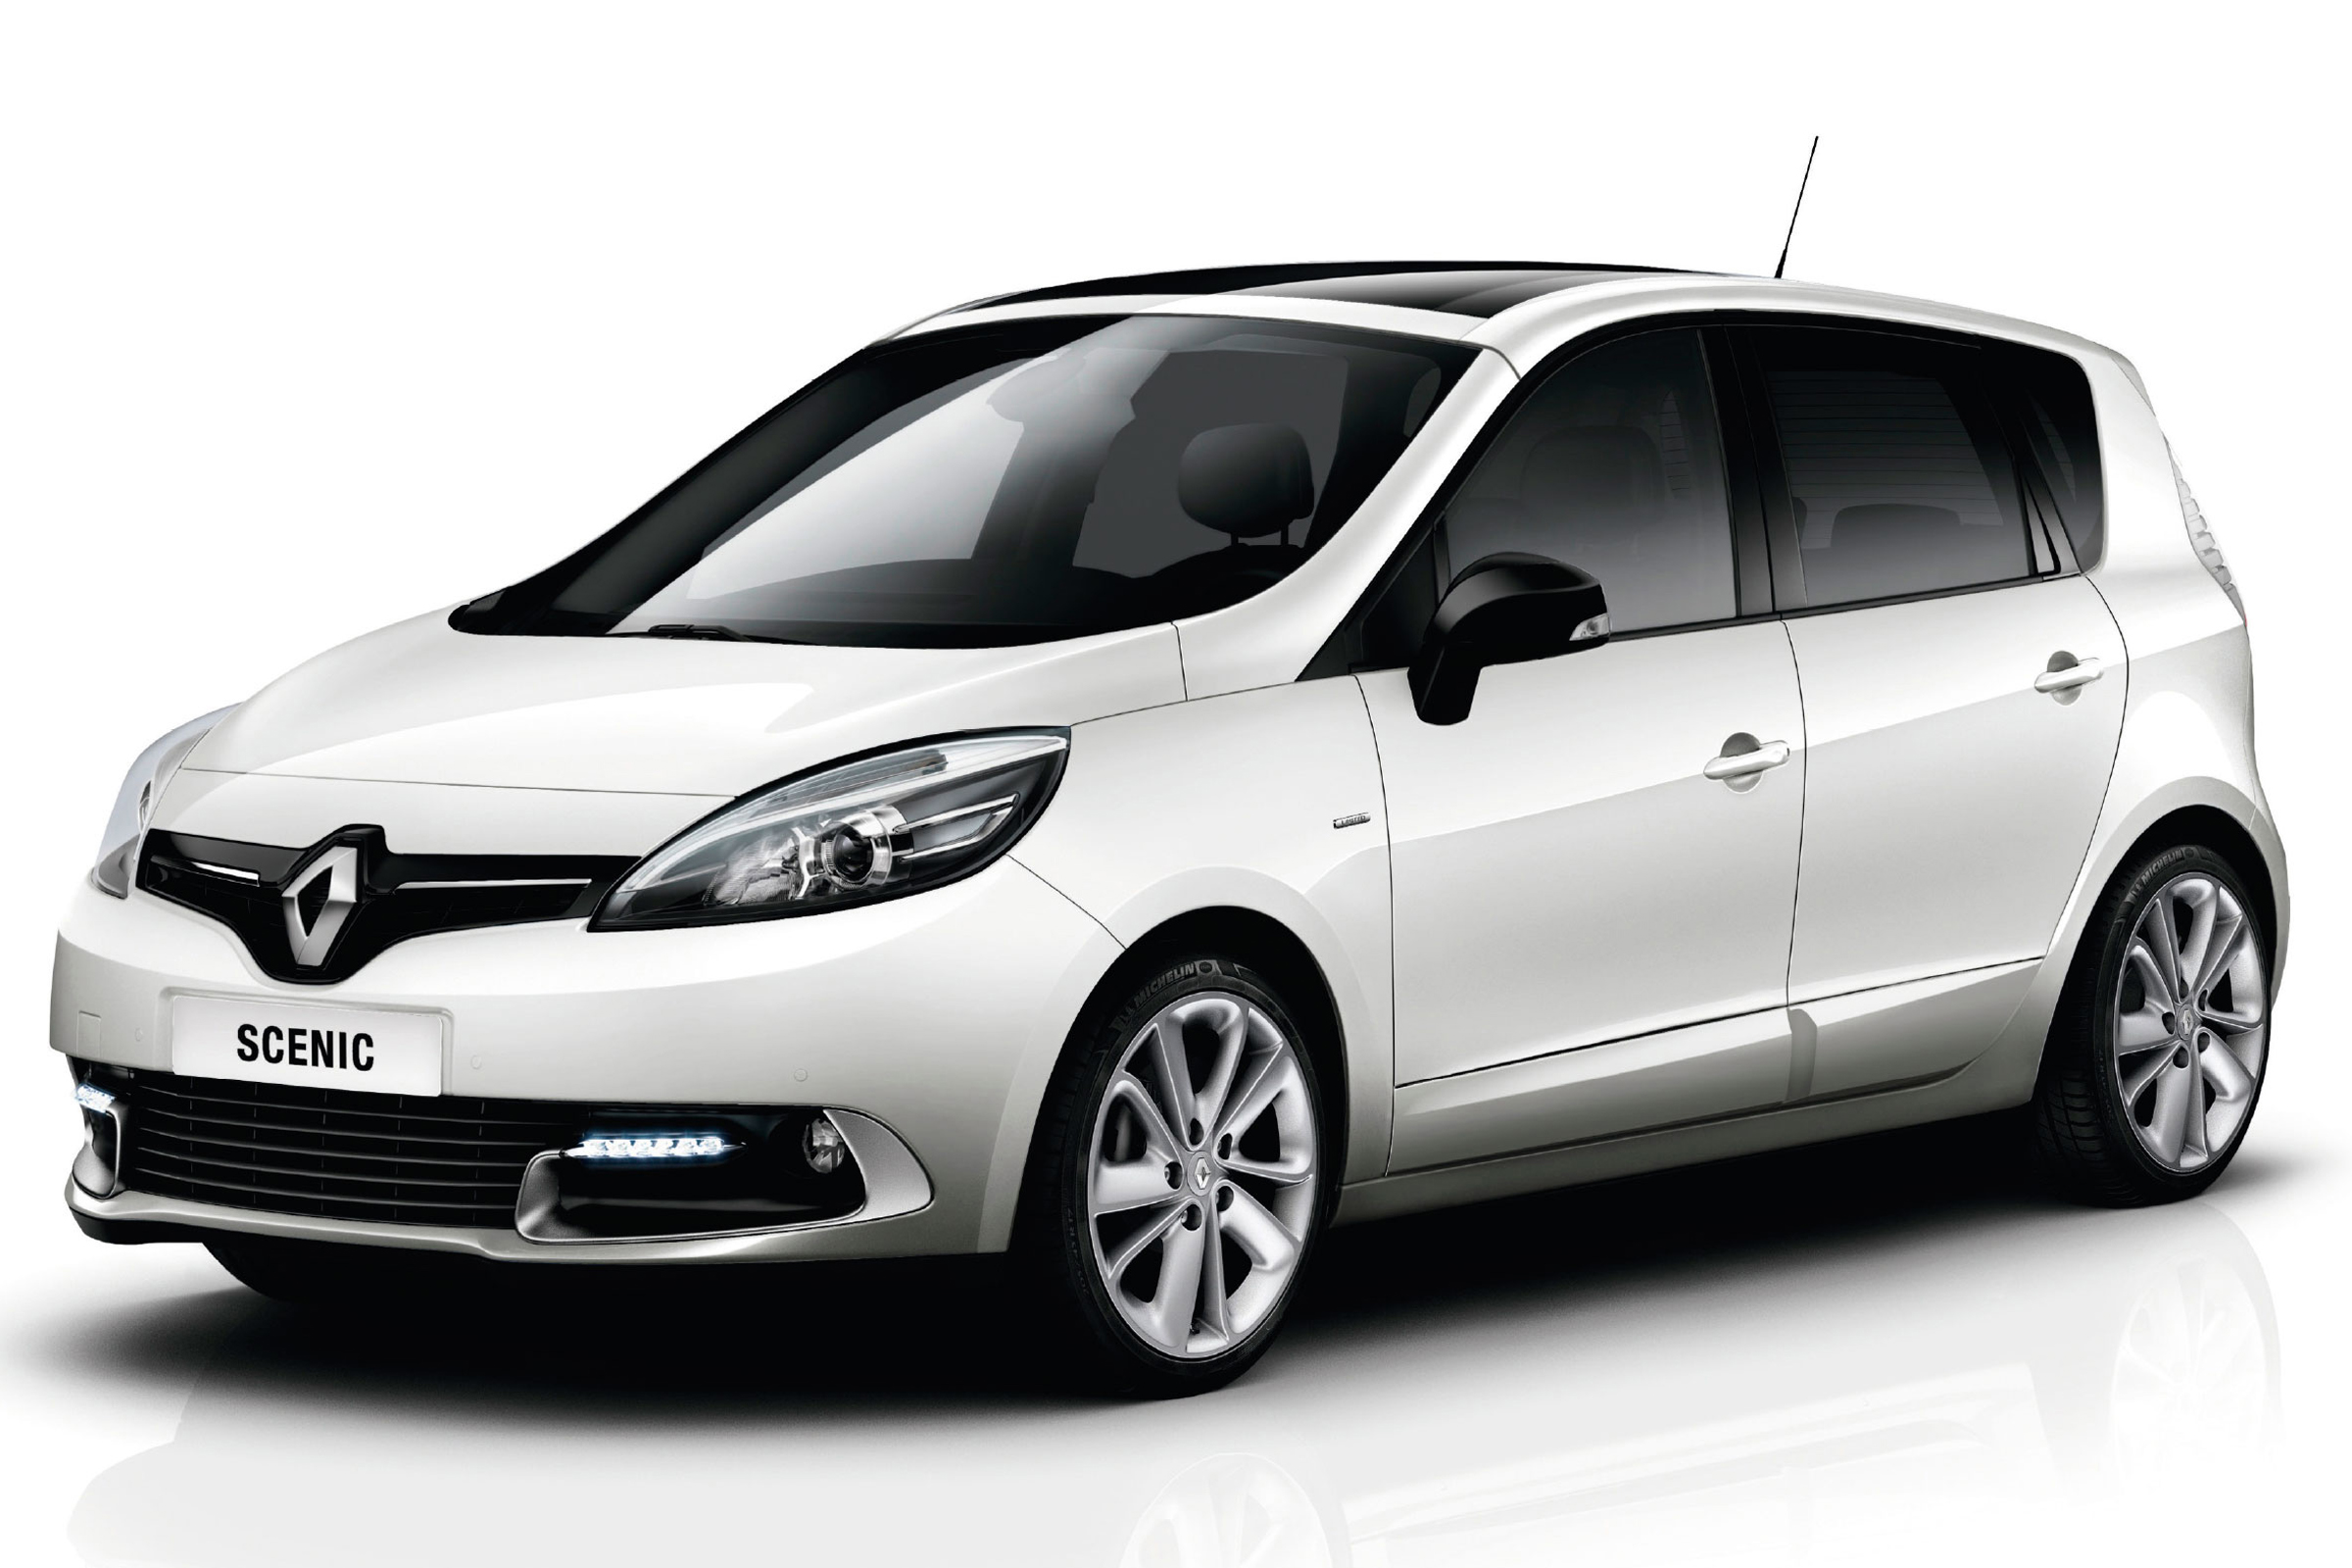 Renault Scenic 3 - Check For These Issues Before Buying 